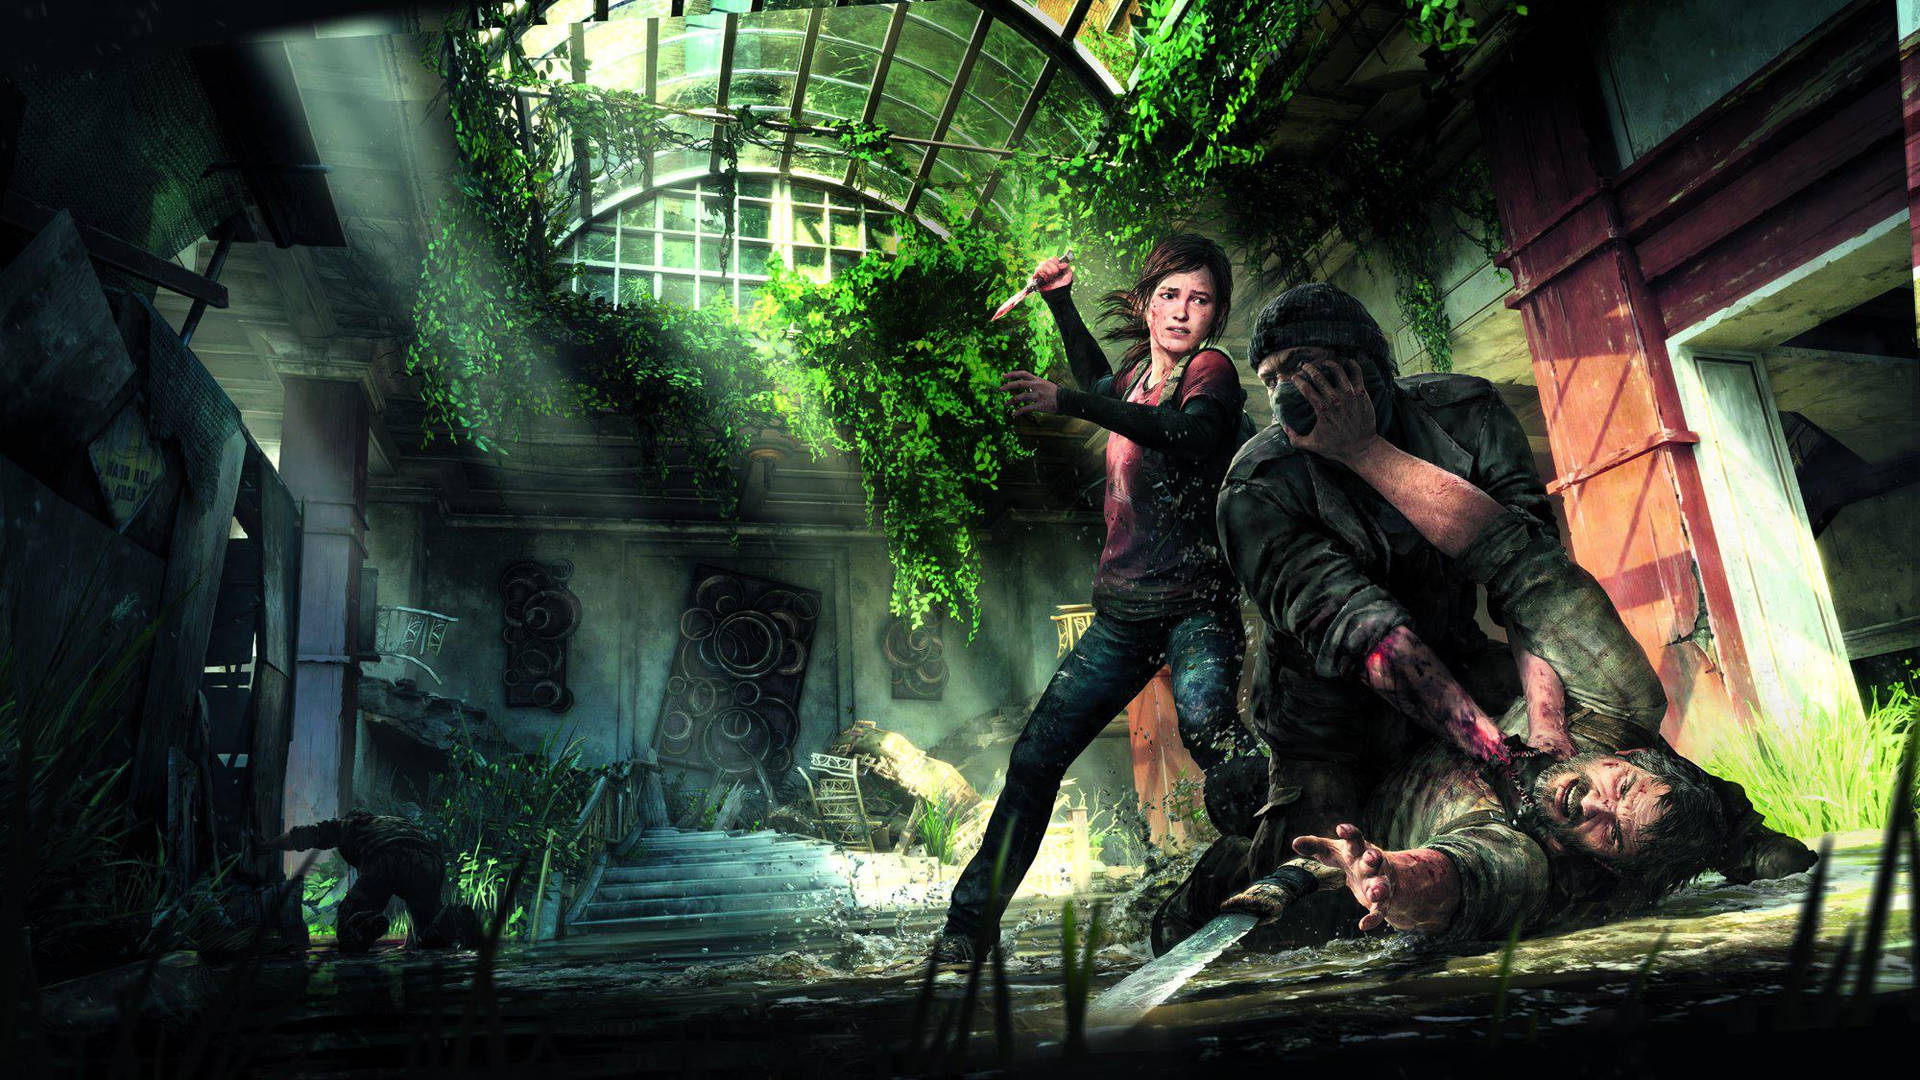 Free The Last Of Us Mobile Wallpaper Downloads, [100+] The Last Of Us  Mobile Wallpapers for FREE 